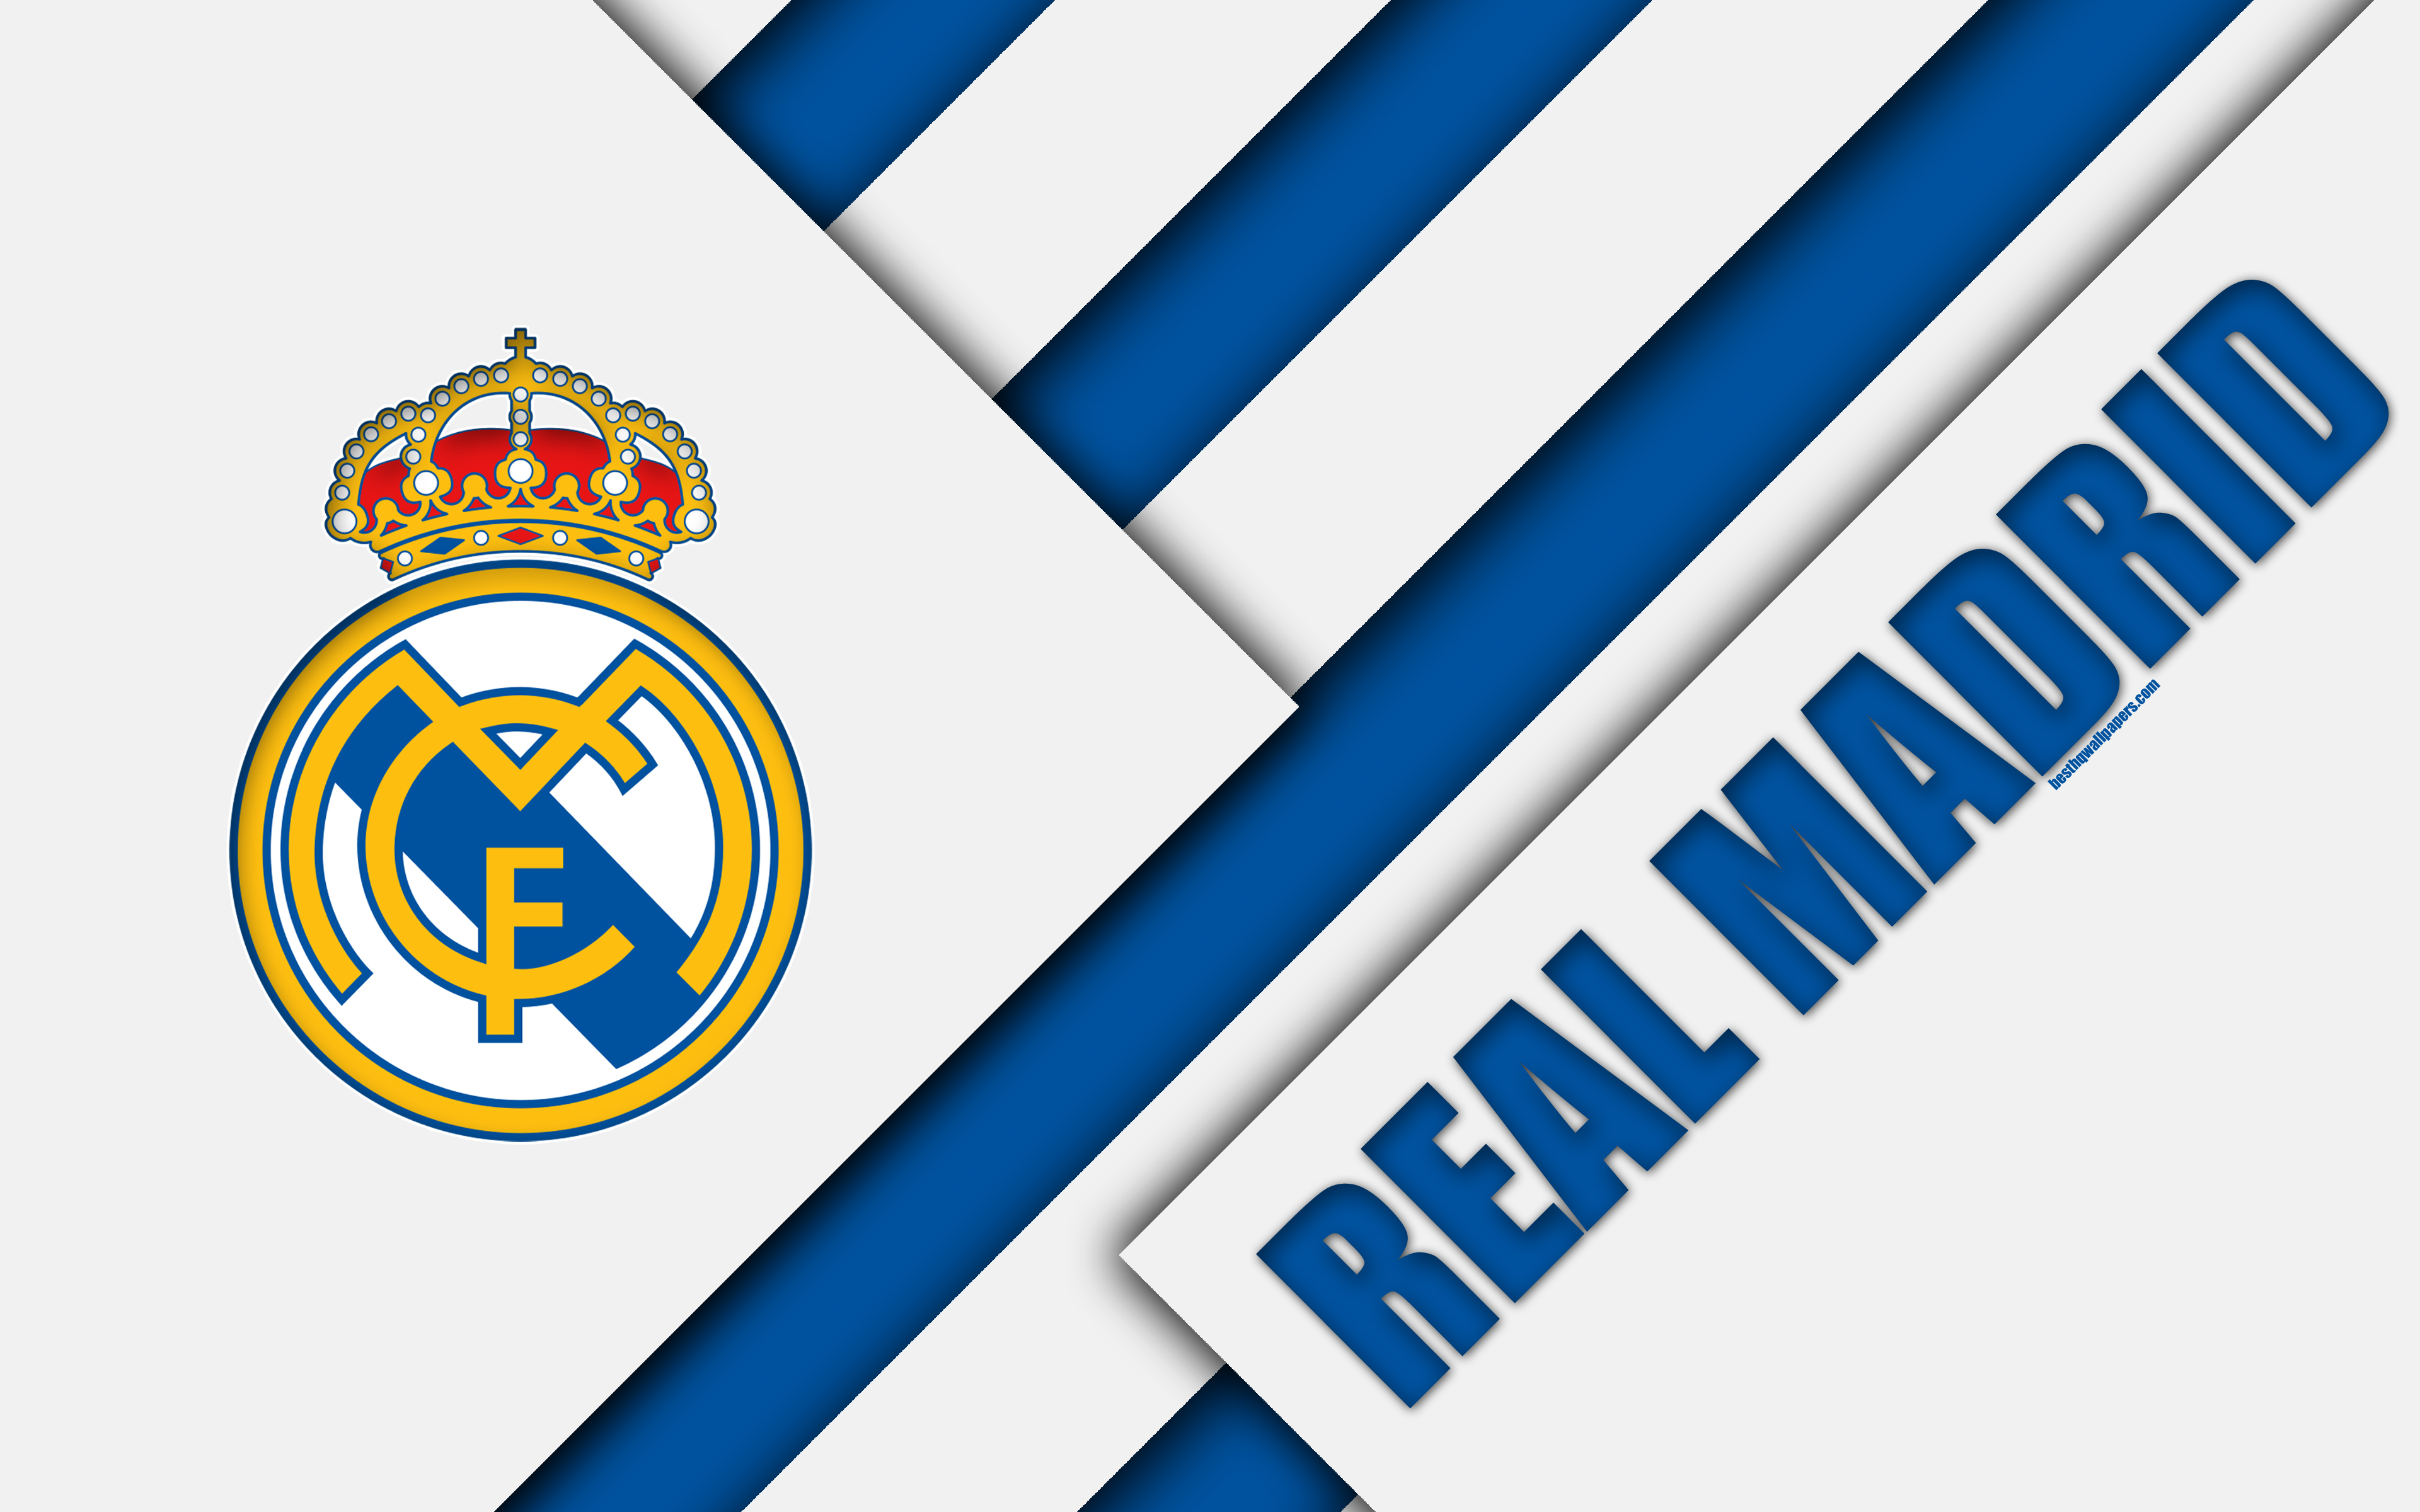 Download wallpaper Real Madrid CF, 4K, Spanish football club, Real Madrid logo, material design, blue white abstraction, football, La Liga, Madrid, Spain for desktop with resolution 3840x2400. High Quality HD picture wallpaper